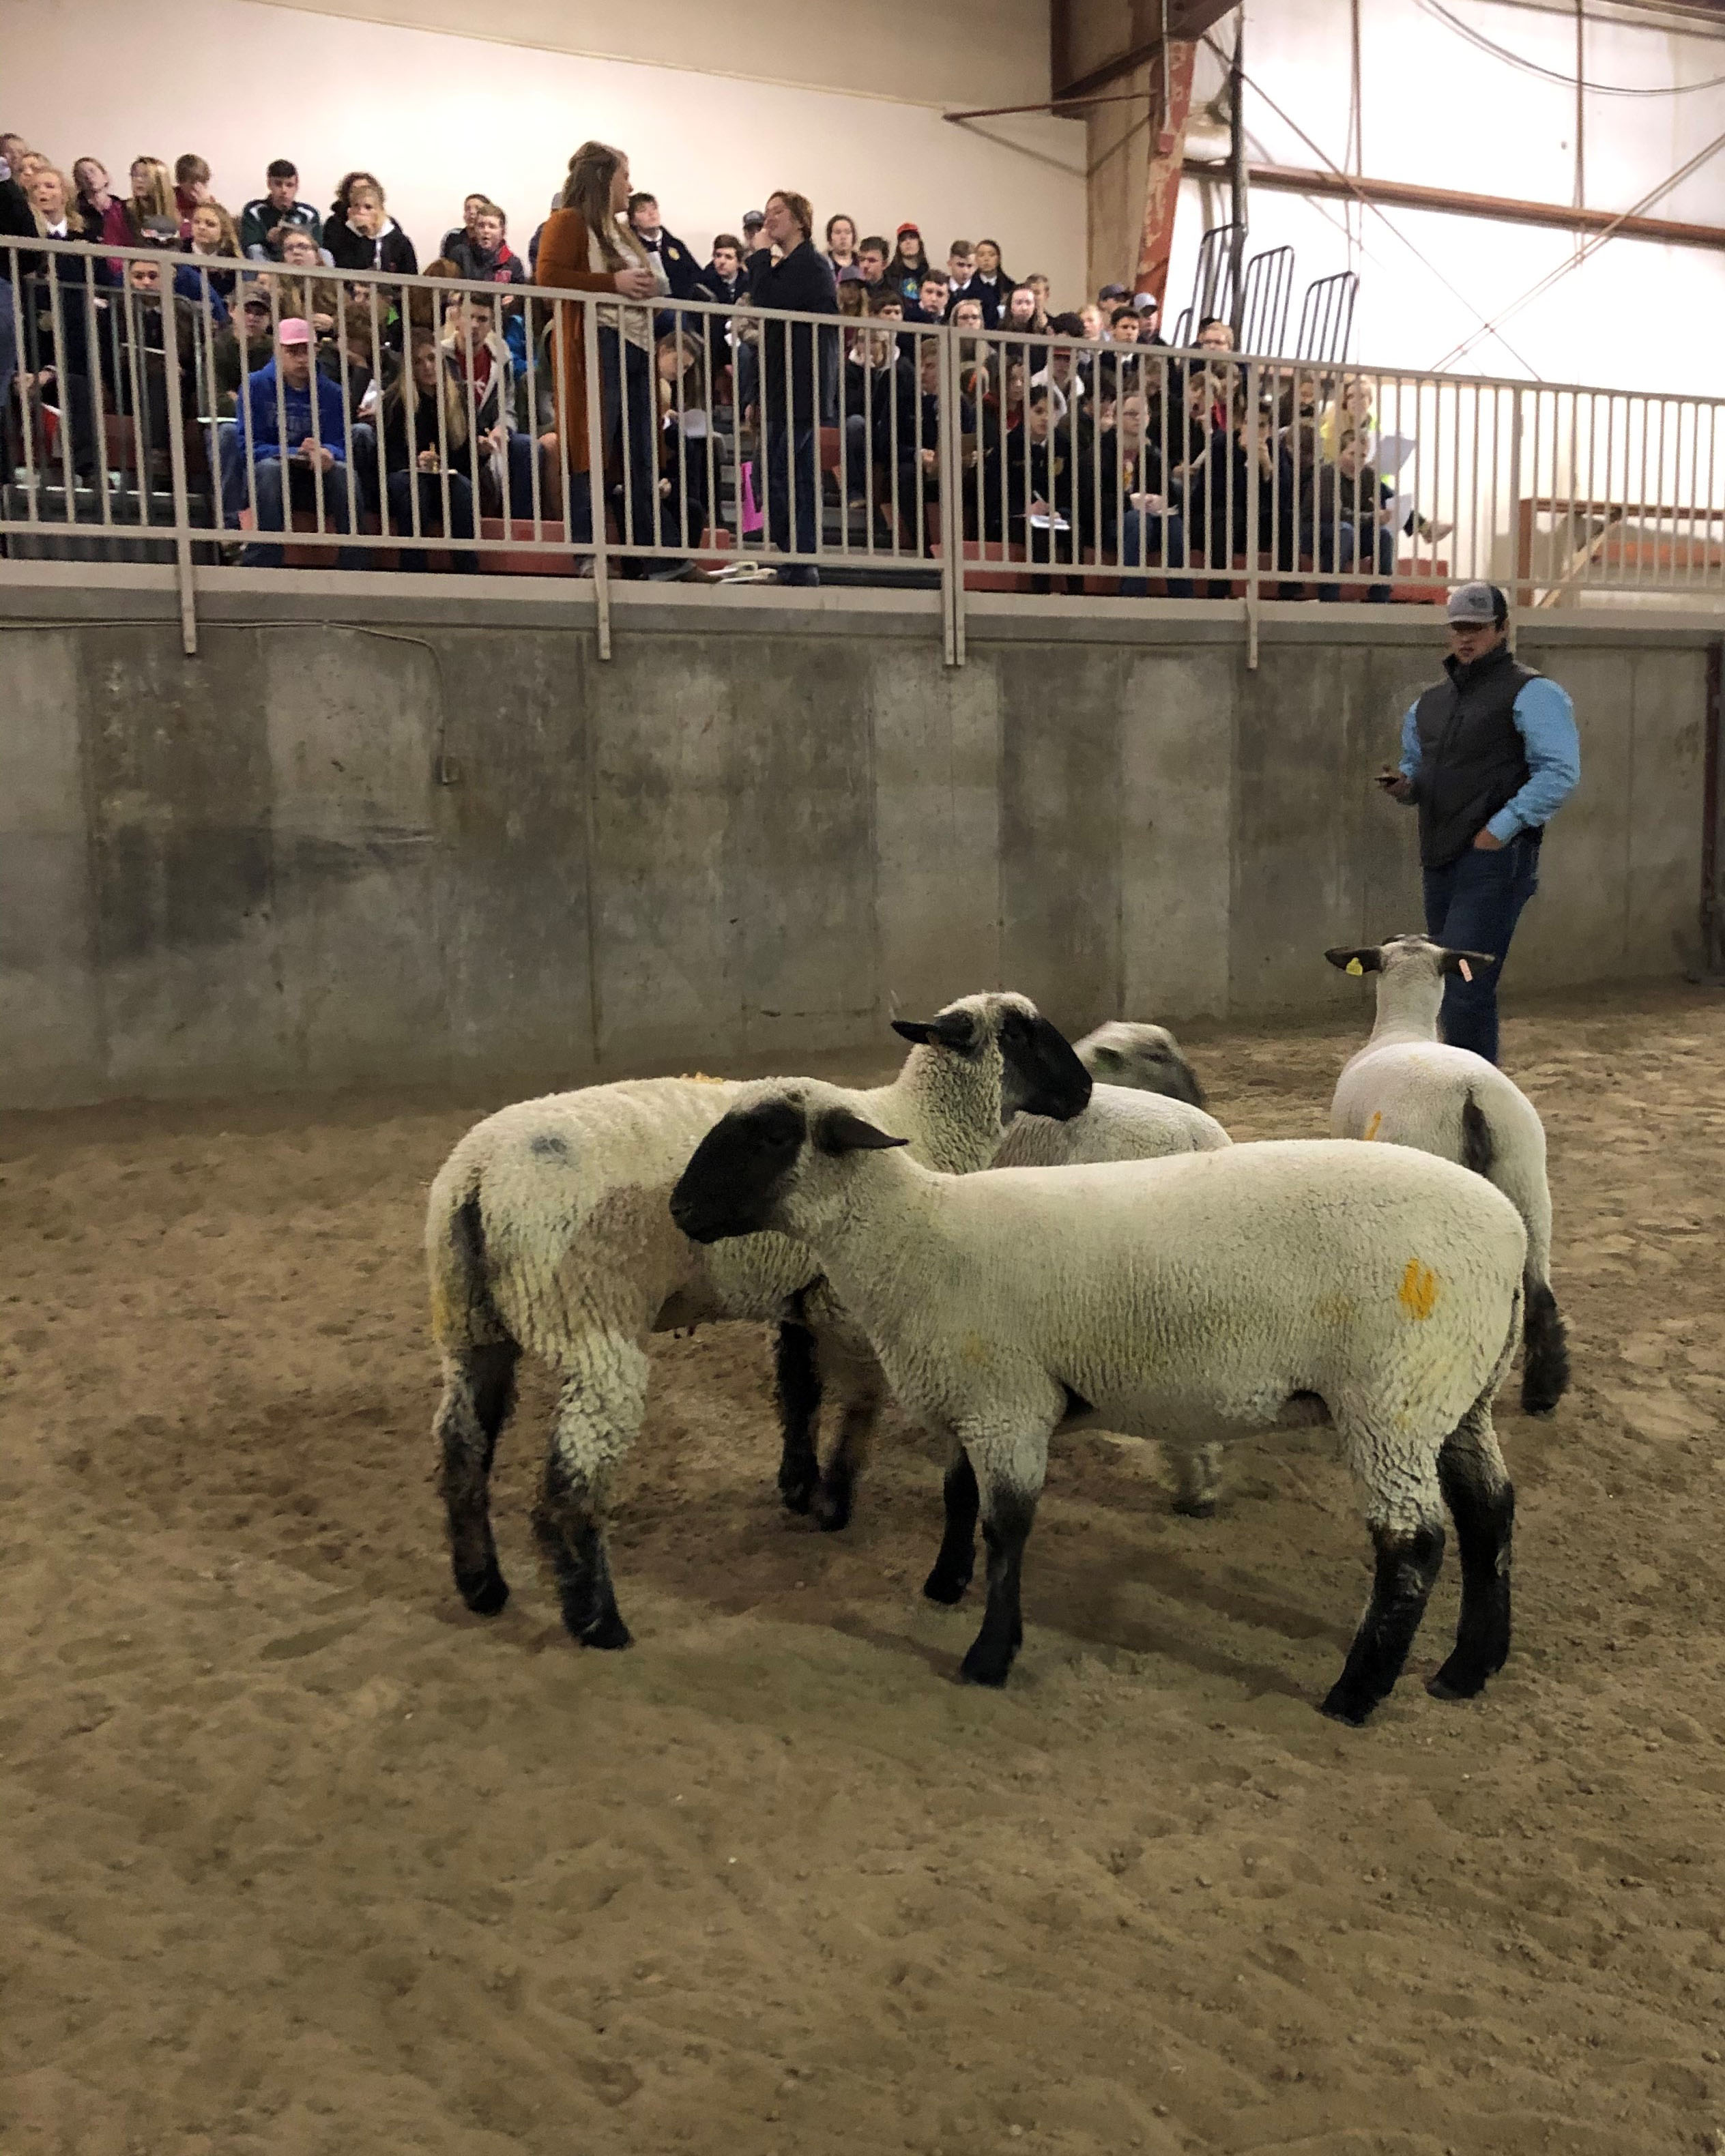 Sheep evaluation during a recent FFA contest at NCTA in Curtis. (Photo by Annie Bassett, NCTA student)